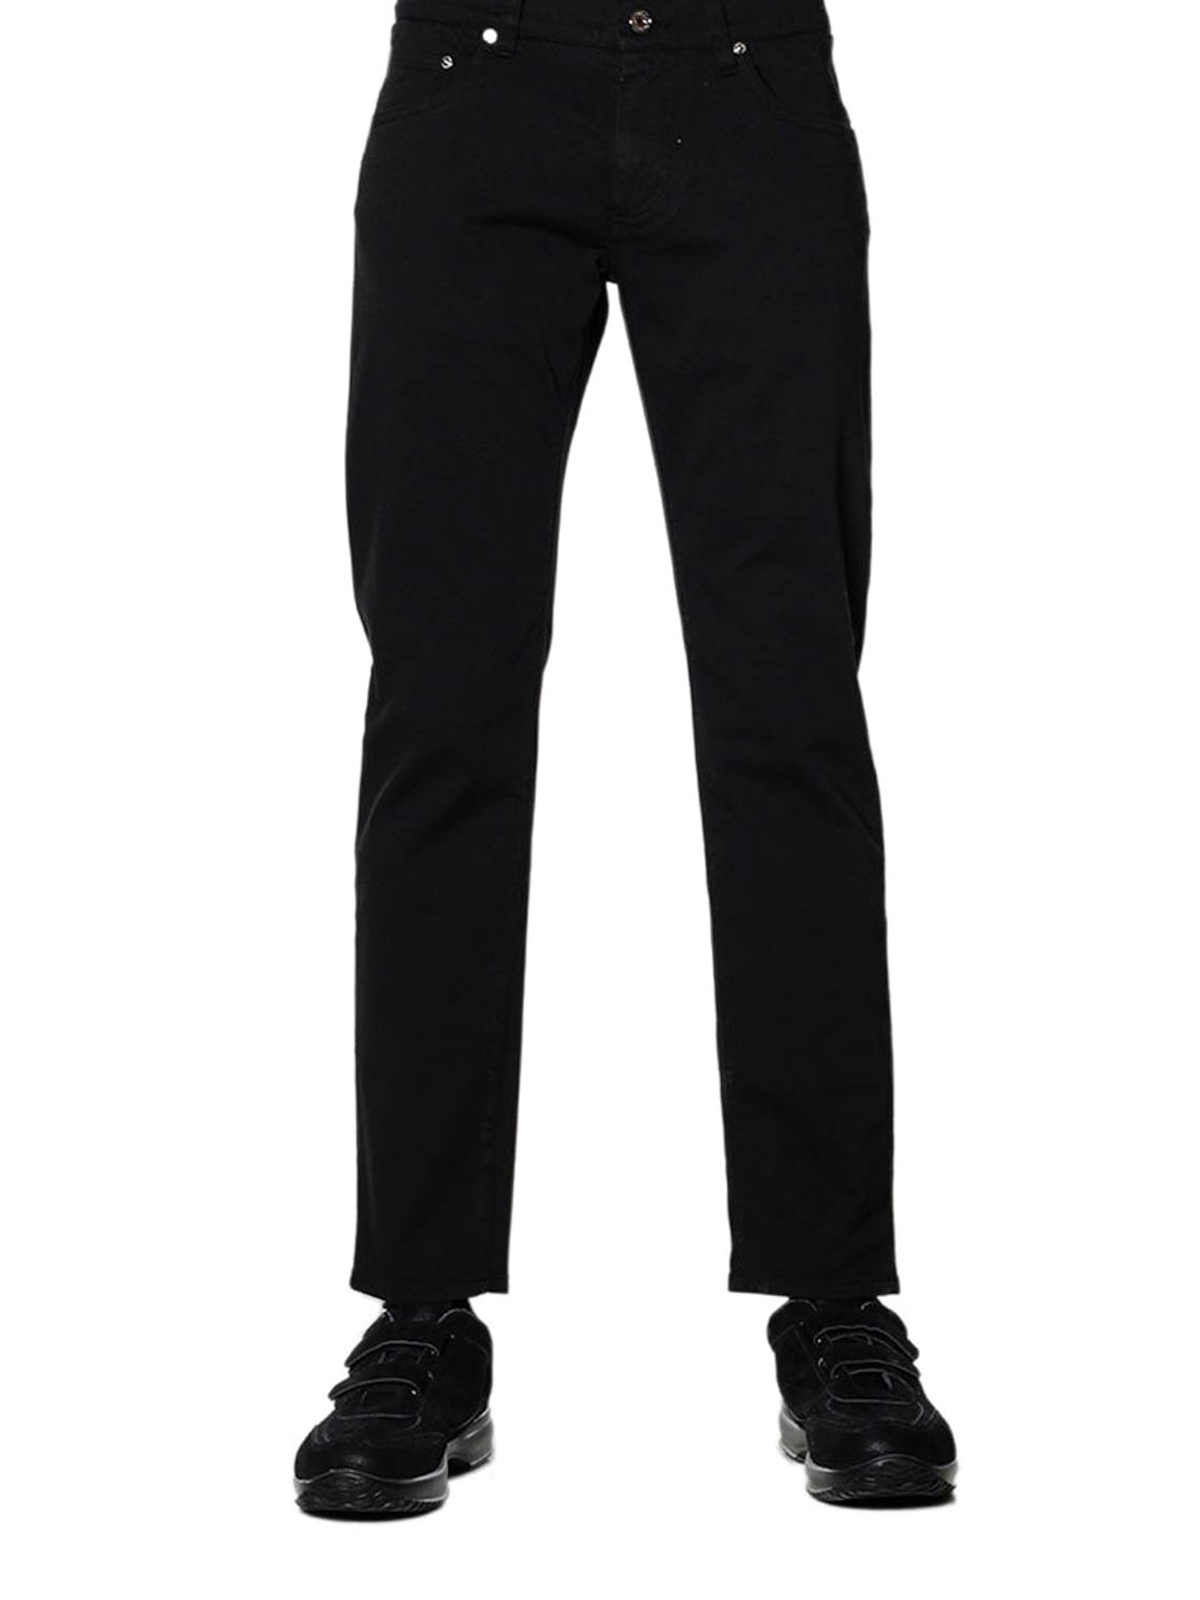 dolce and gabbana black jeans